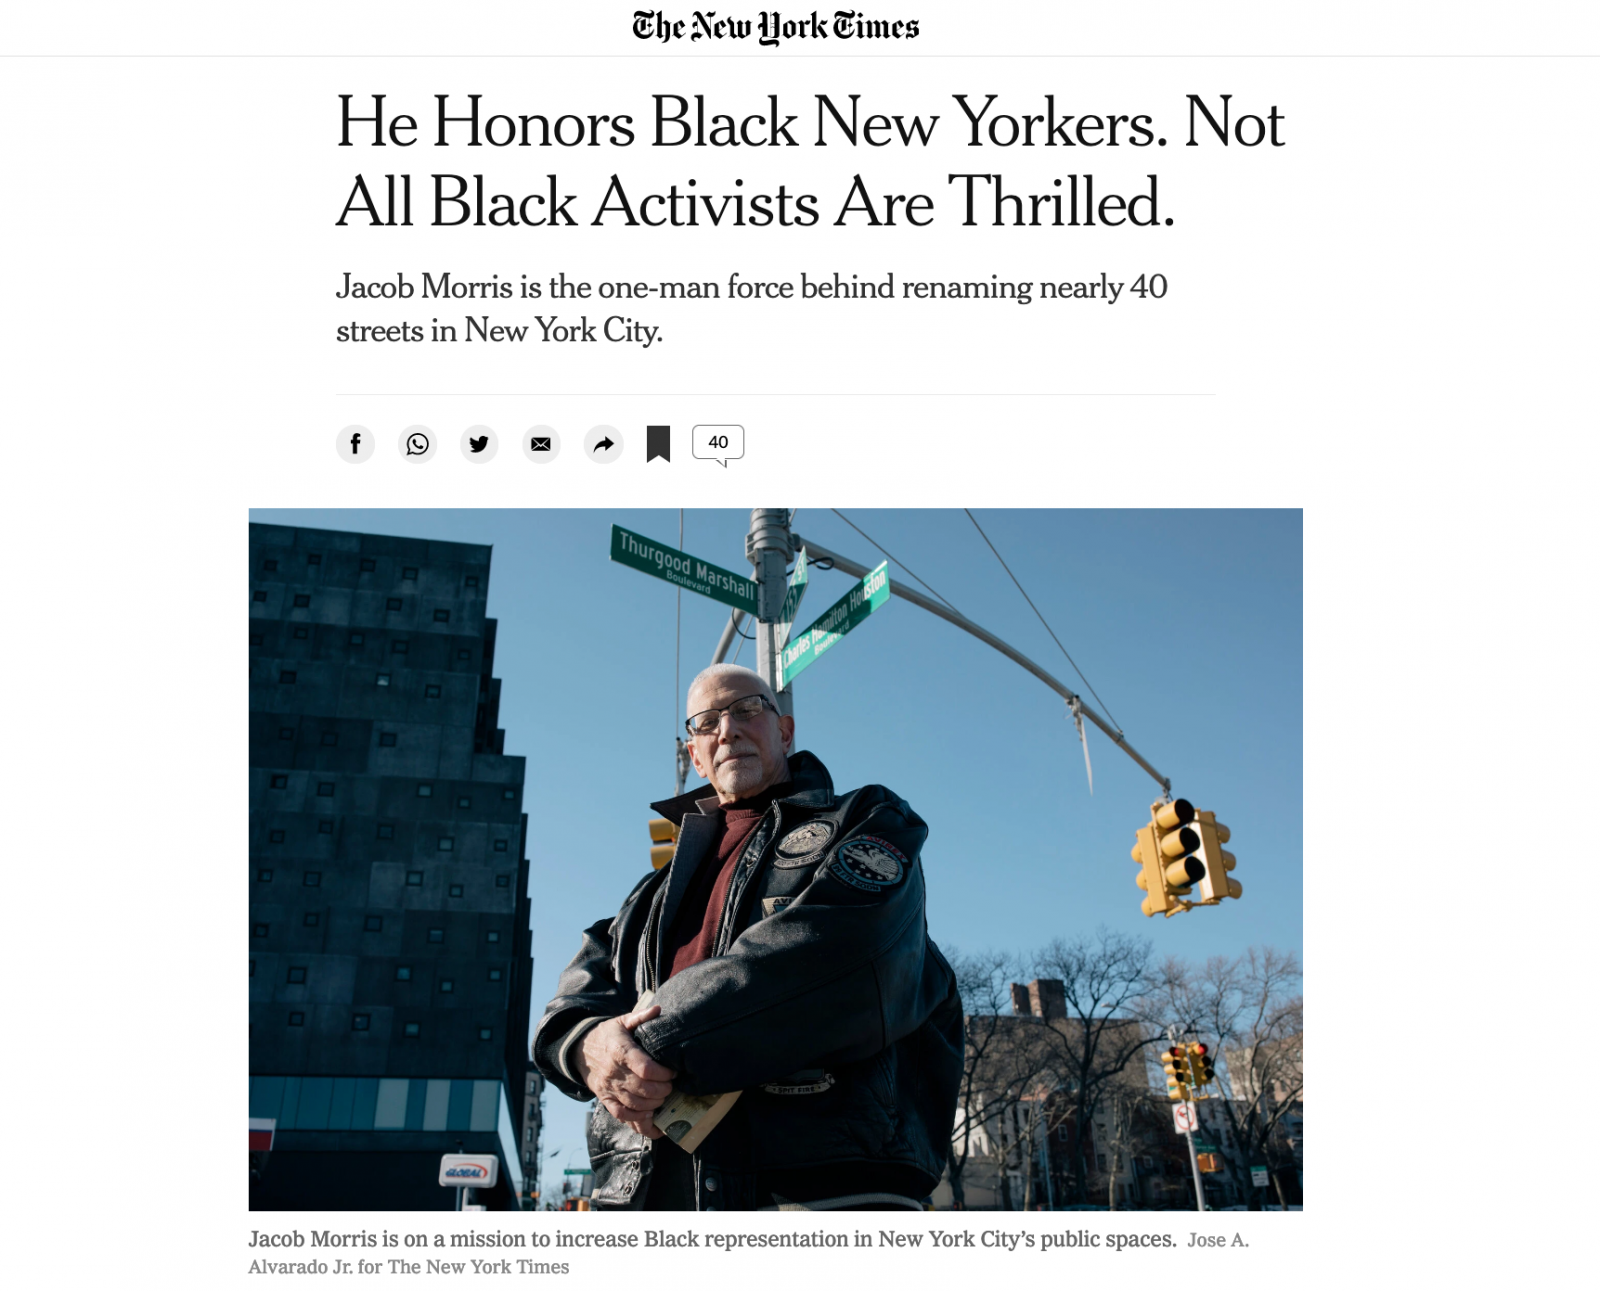 for The New York Times: He Honors Black New Yorkers. Not All Black Activists Are Thrilled.